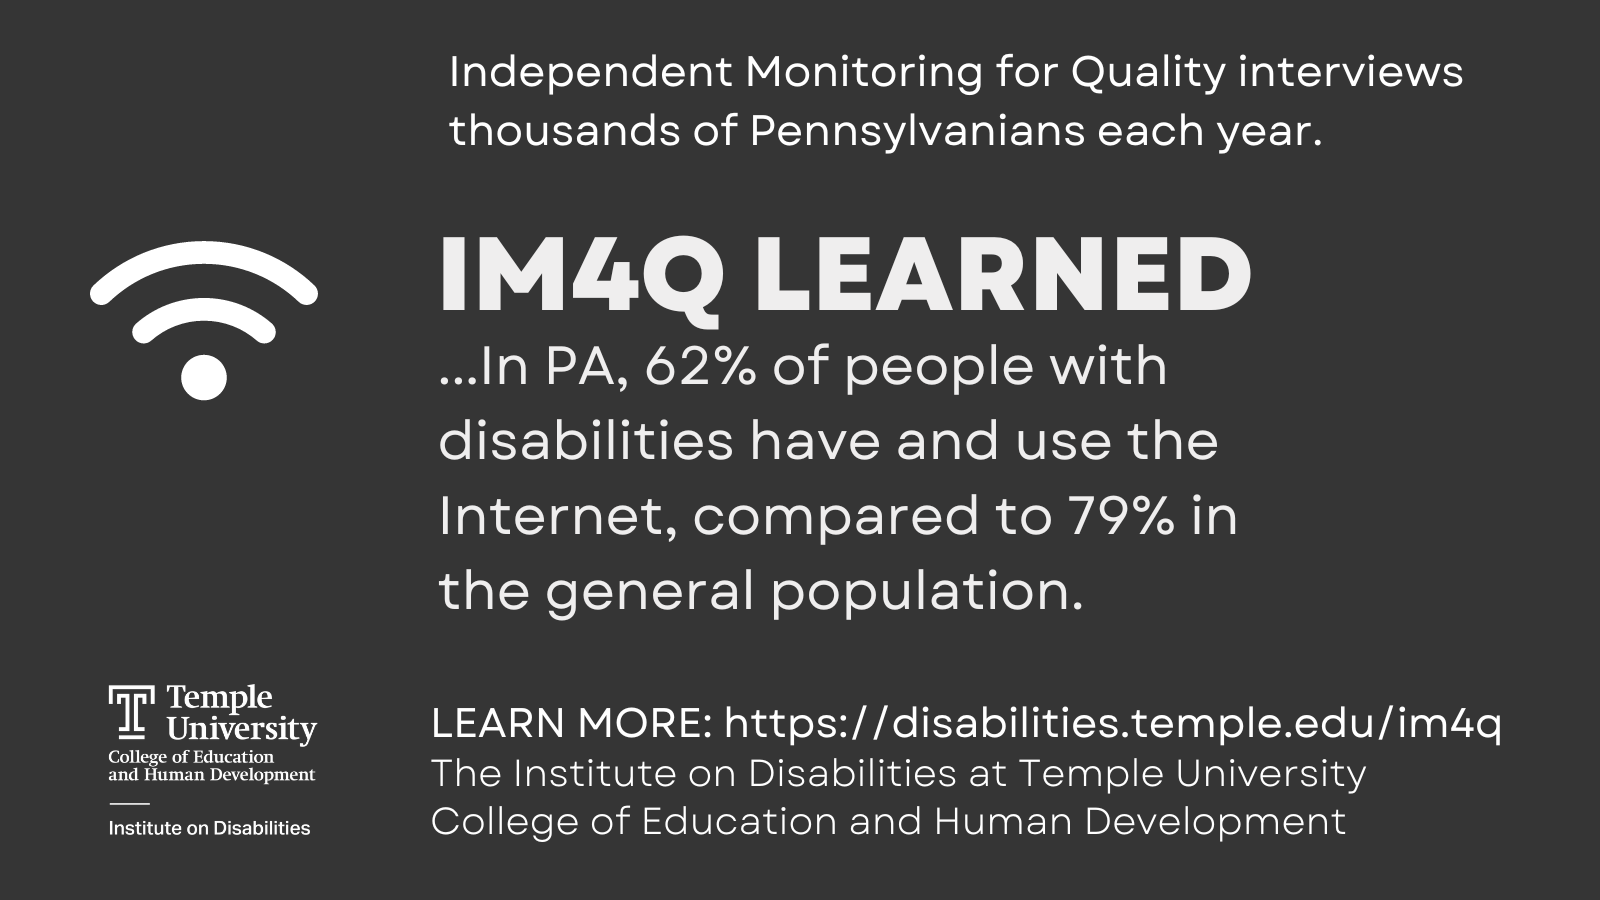 In PA, 62% of people with disabilities have and use the Internet, compared to 79% in the general population.